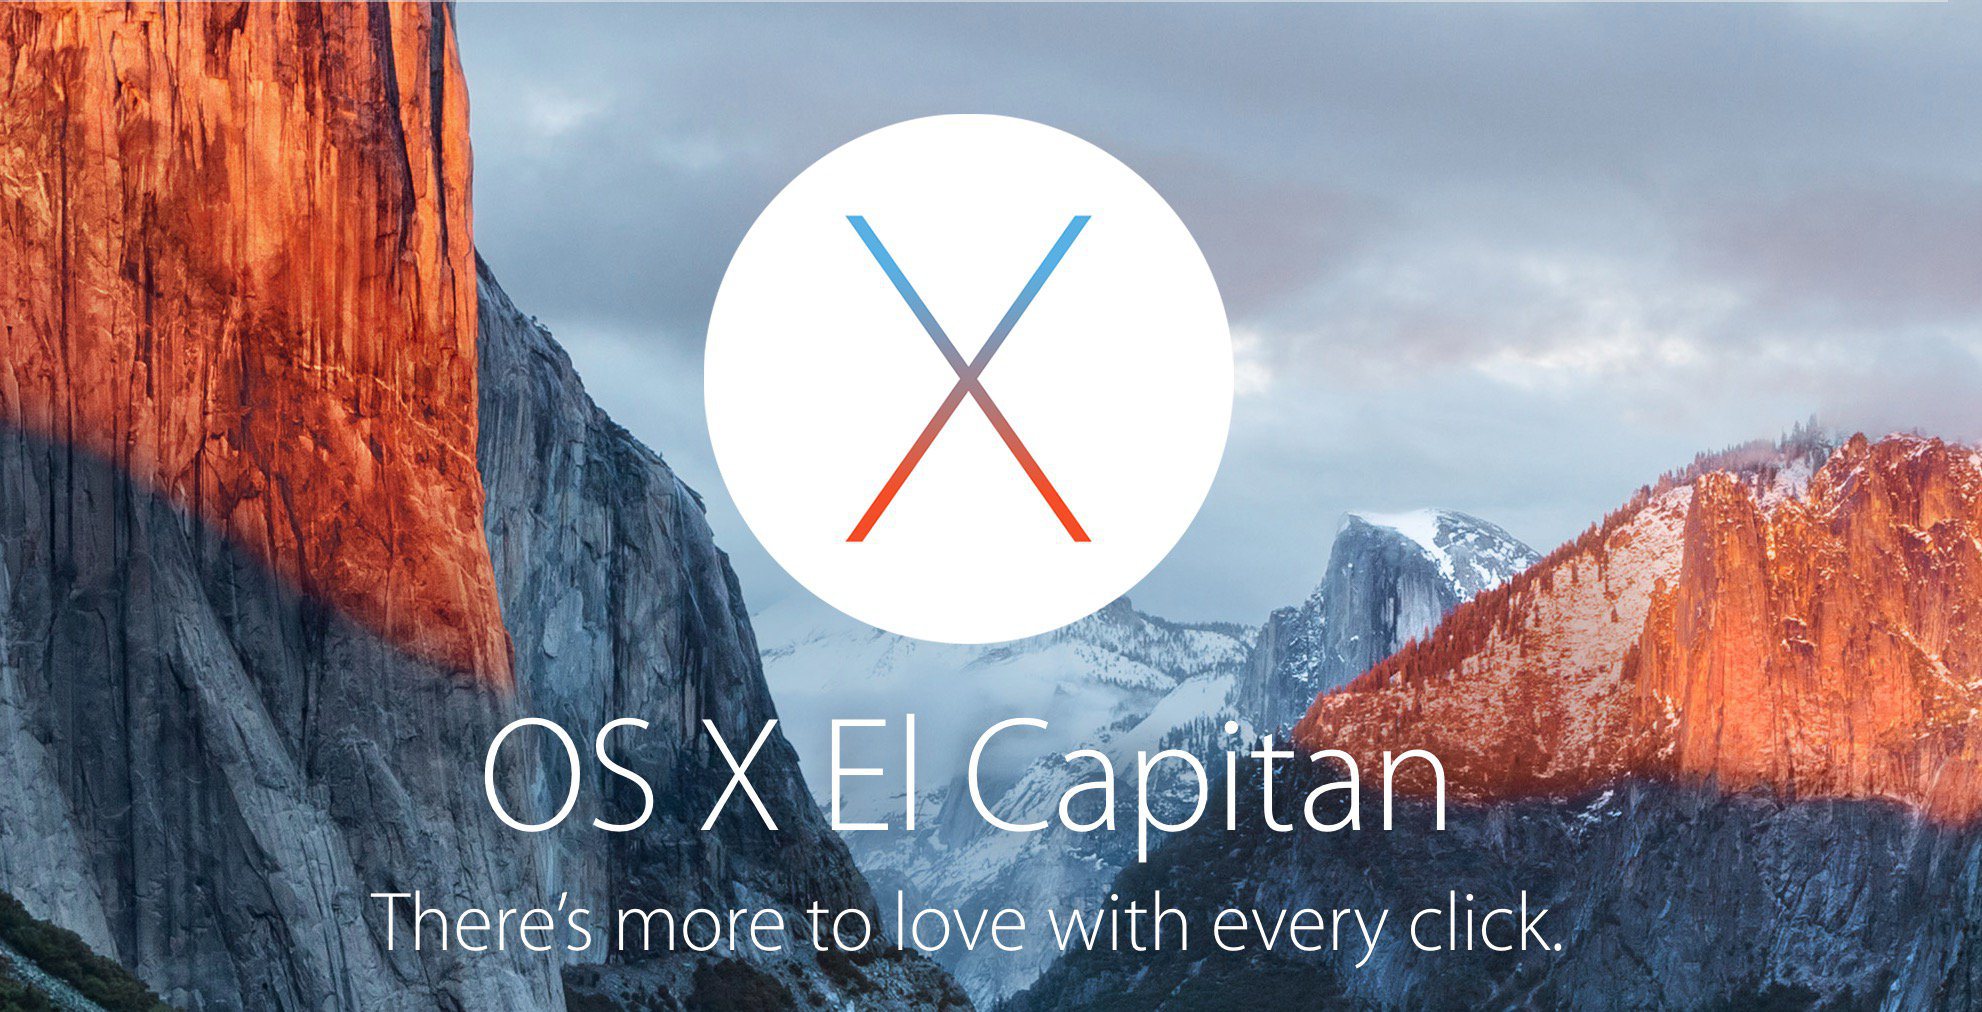 is there an appleworks download for osx el capitan